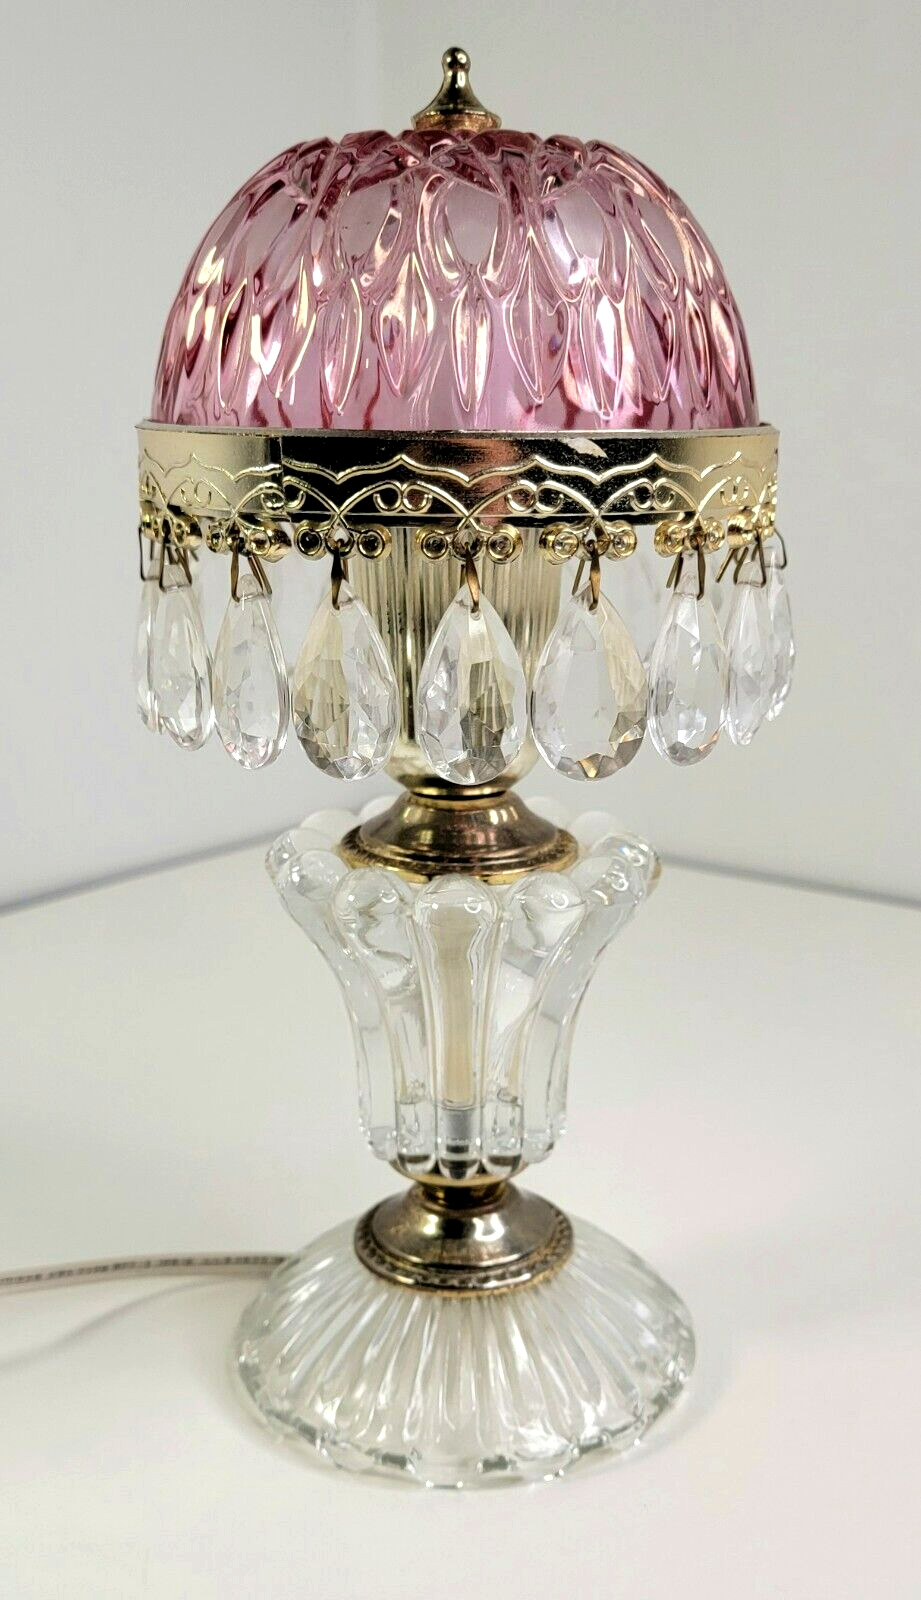 Michelotti Lamp Pink Cranberry Glass Prism Boudoir Complete Works 10 in Holland